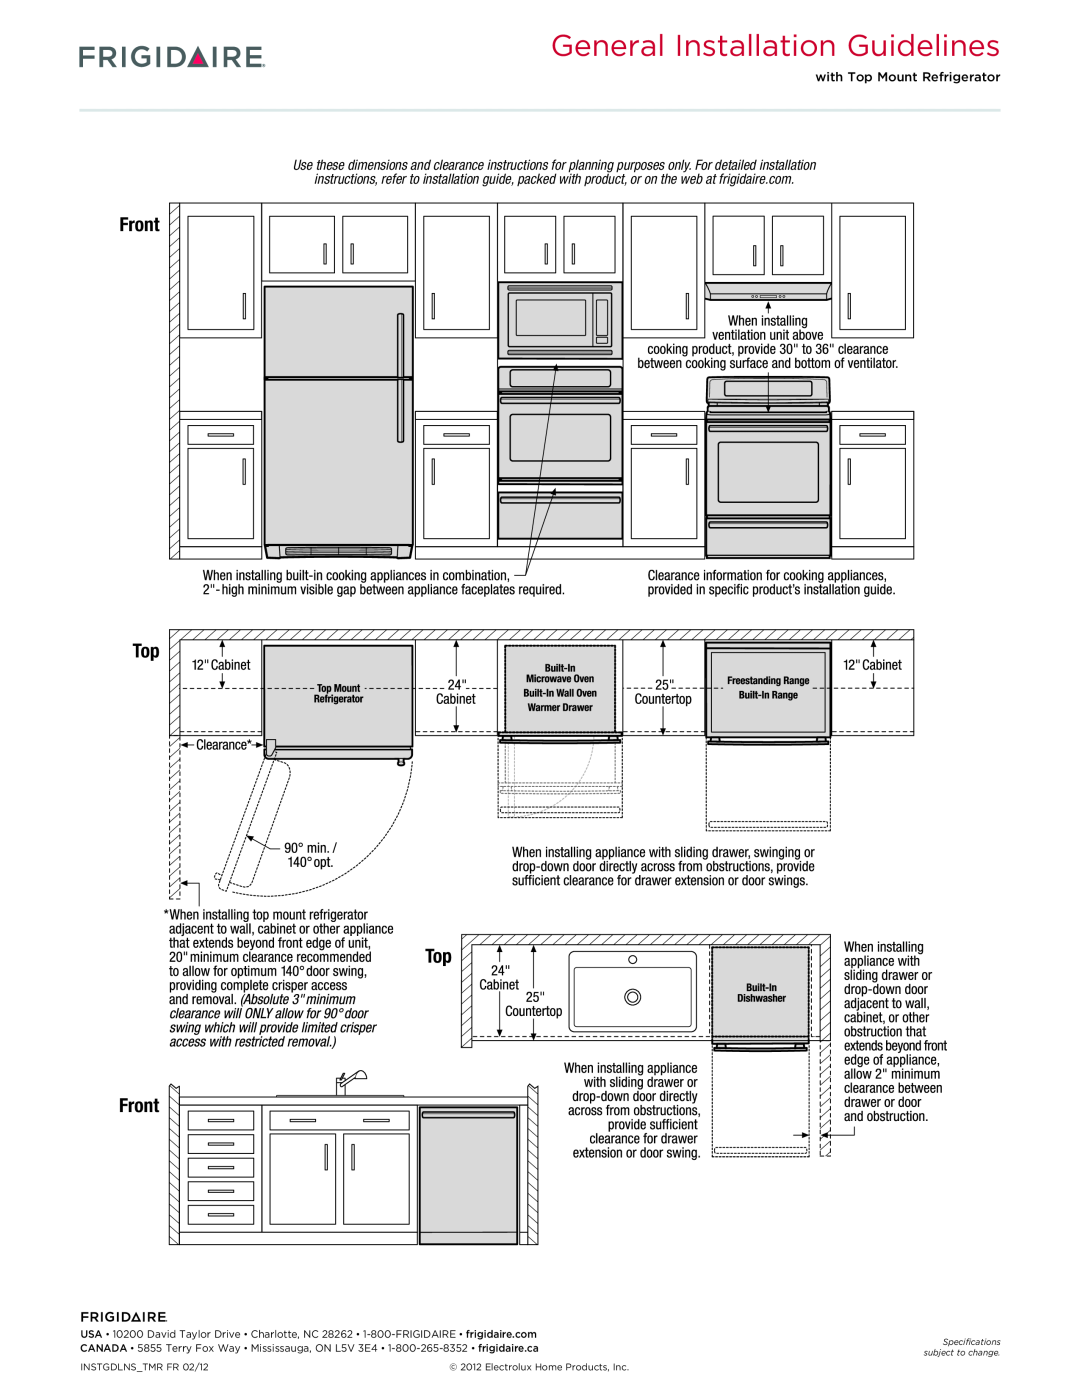 Frigidaire FPET2785K F dimensions Front, General Installation Guidelines 